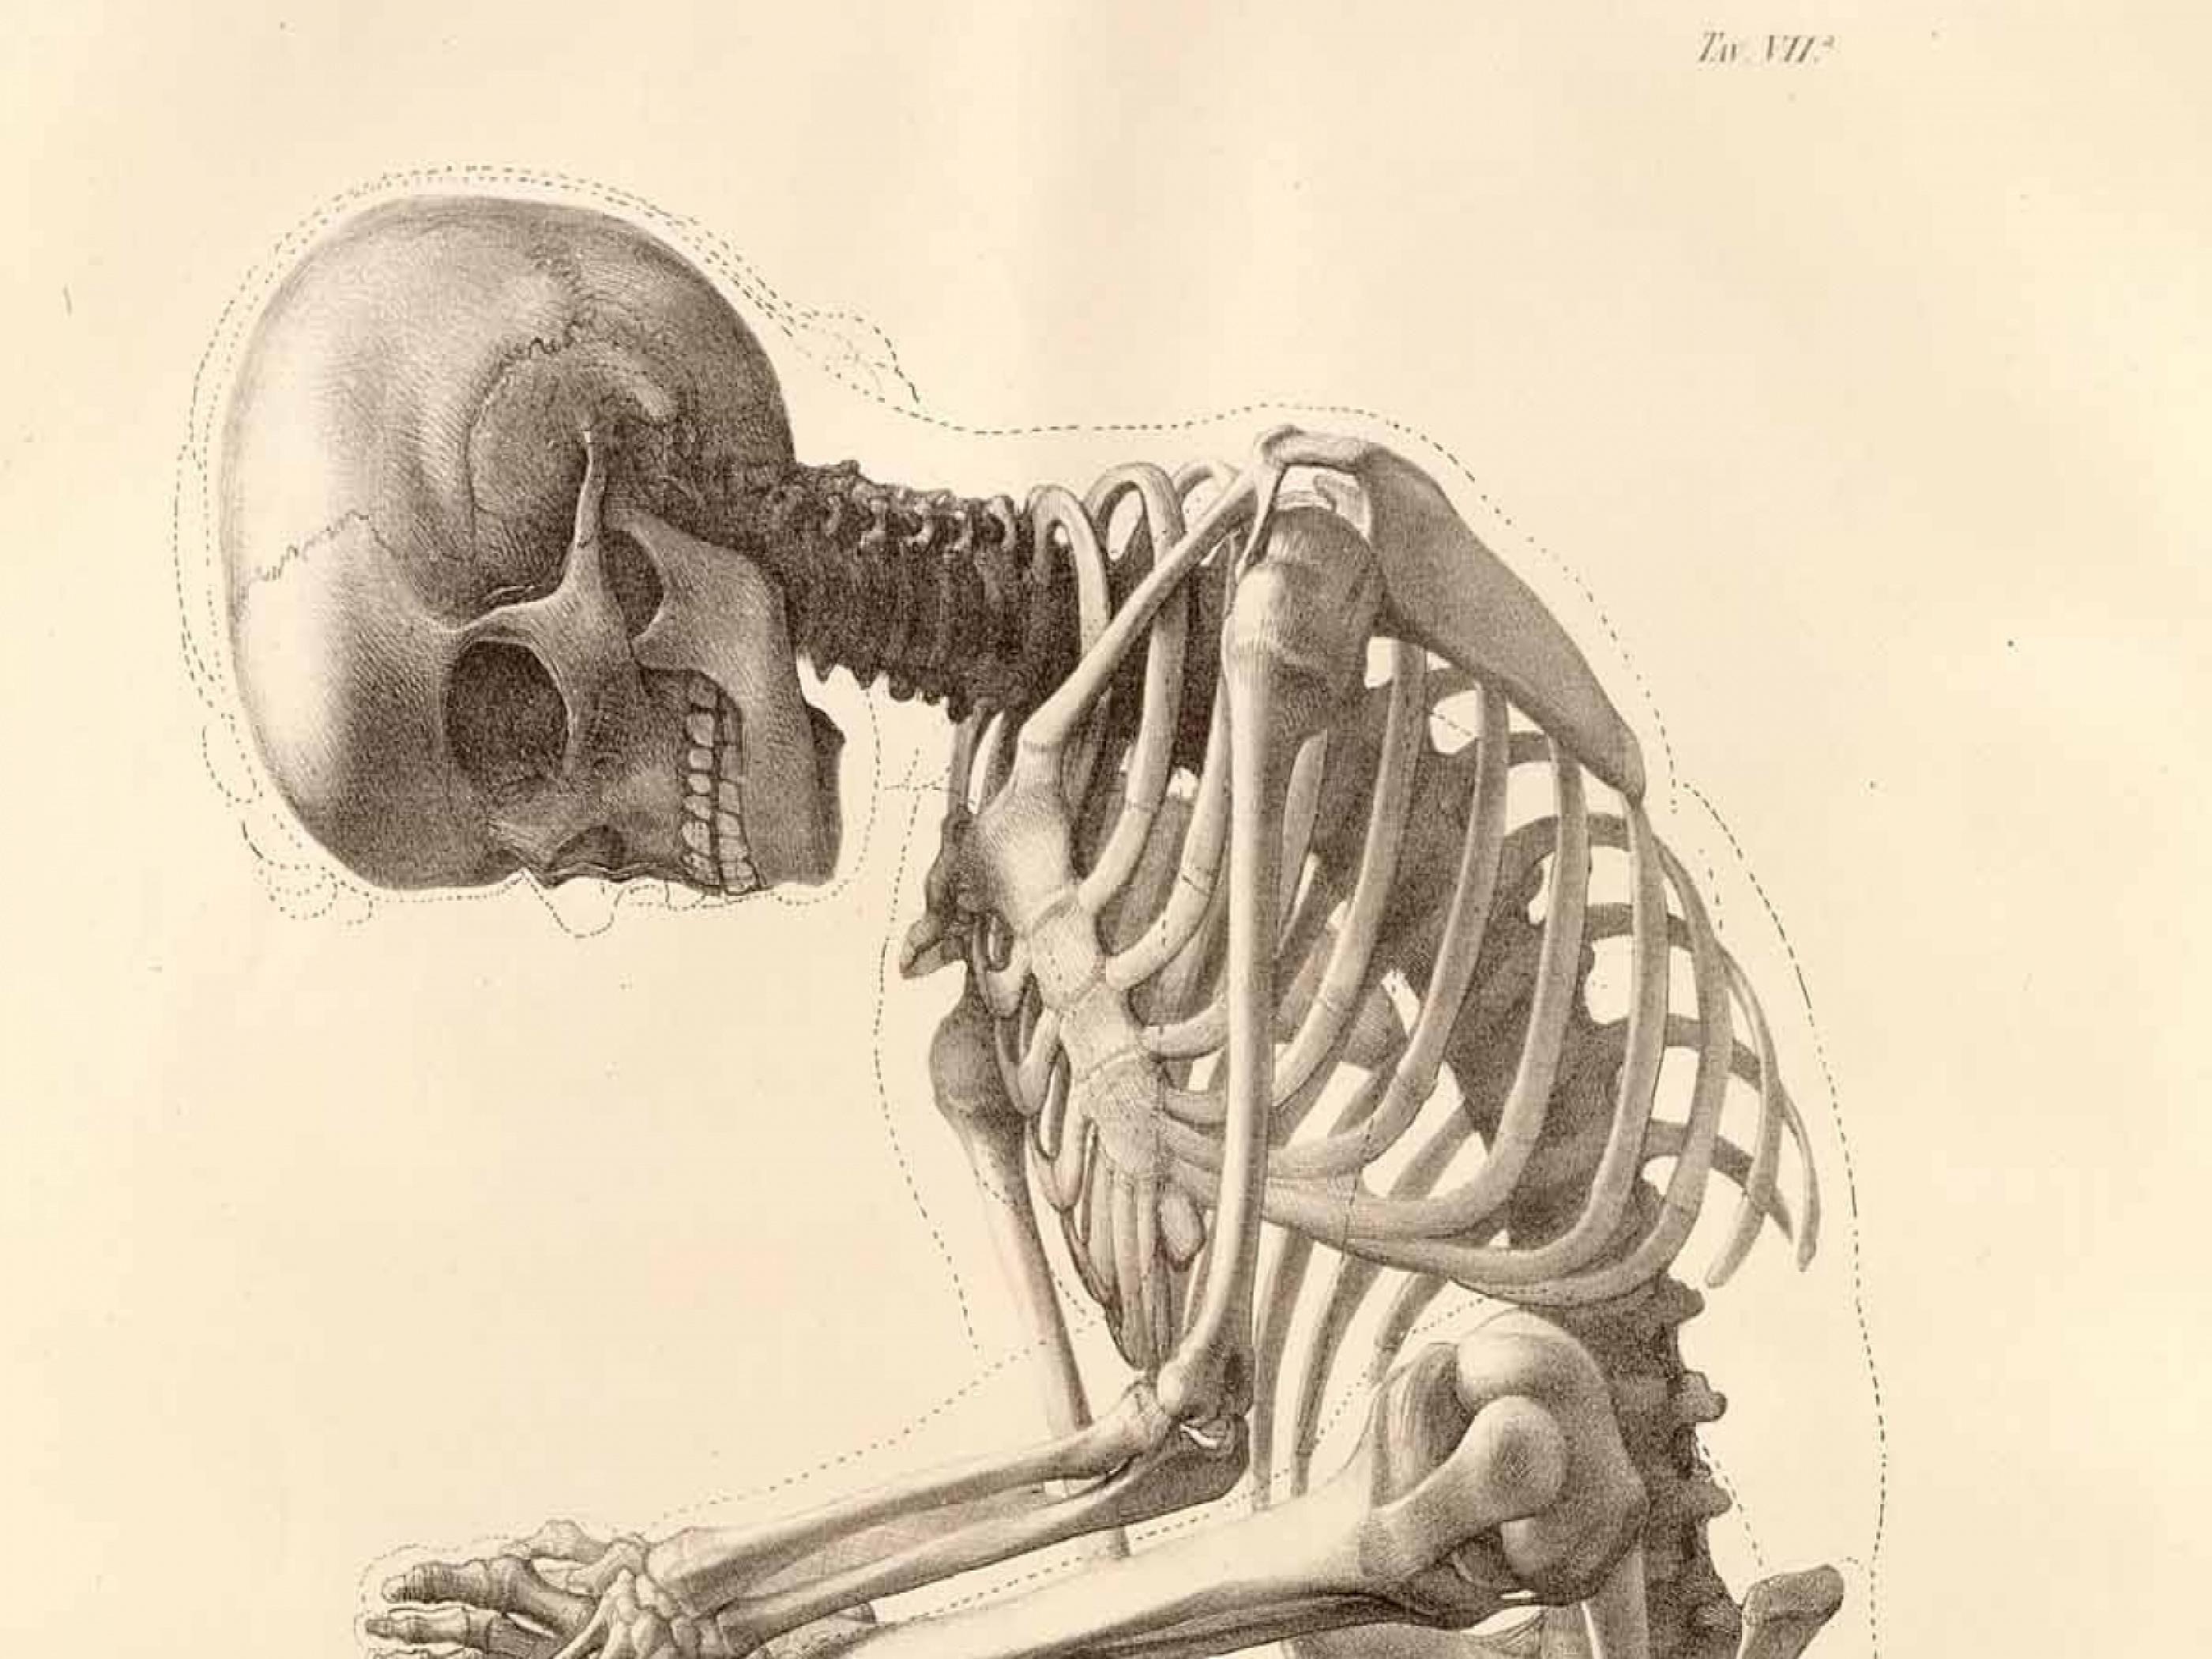 An antique print of a human skeleton in a sitting position with the head turned to the side. - Anatomy